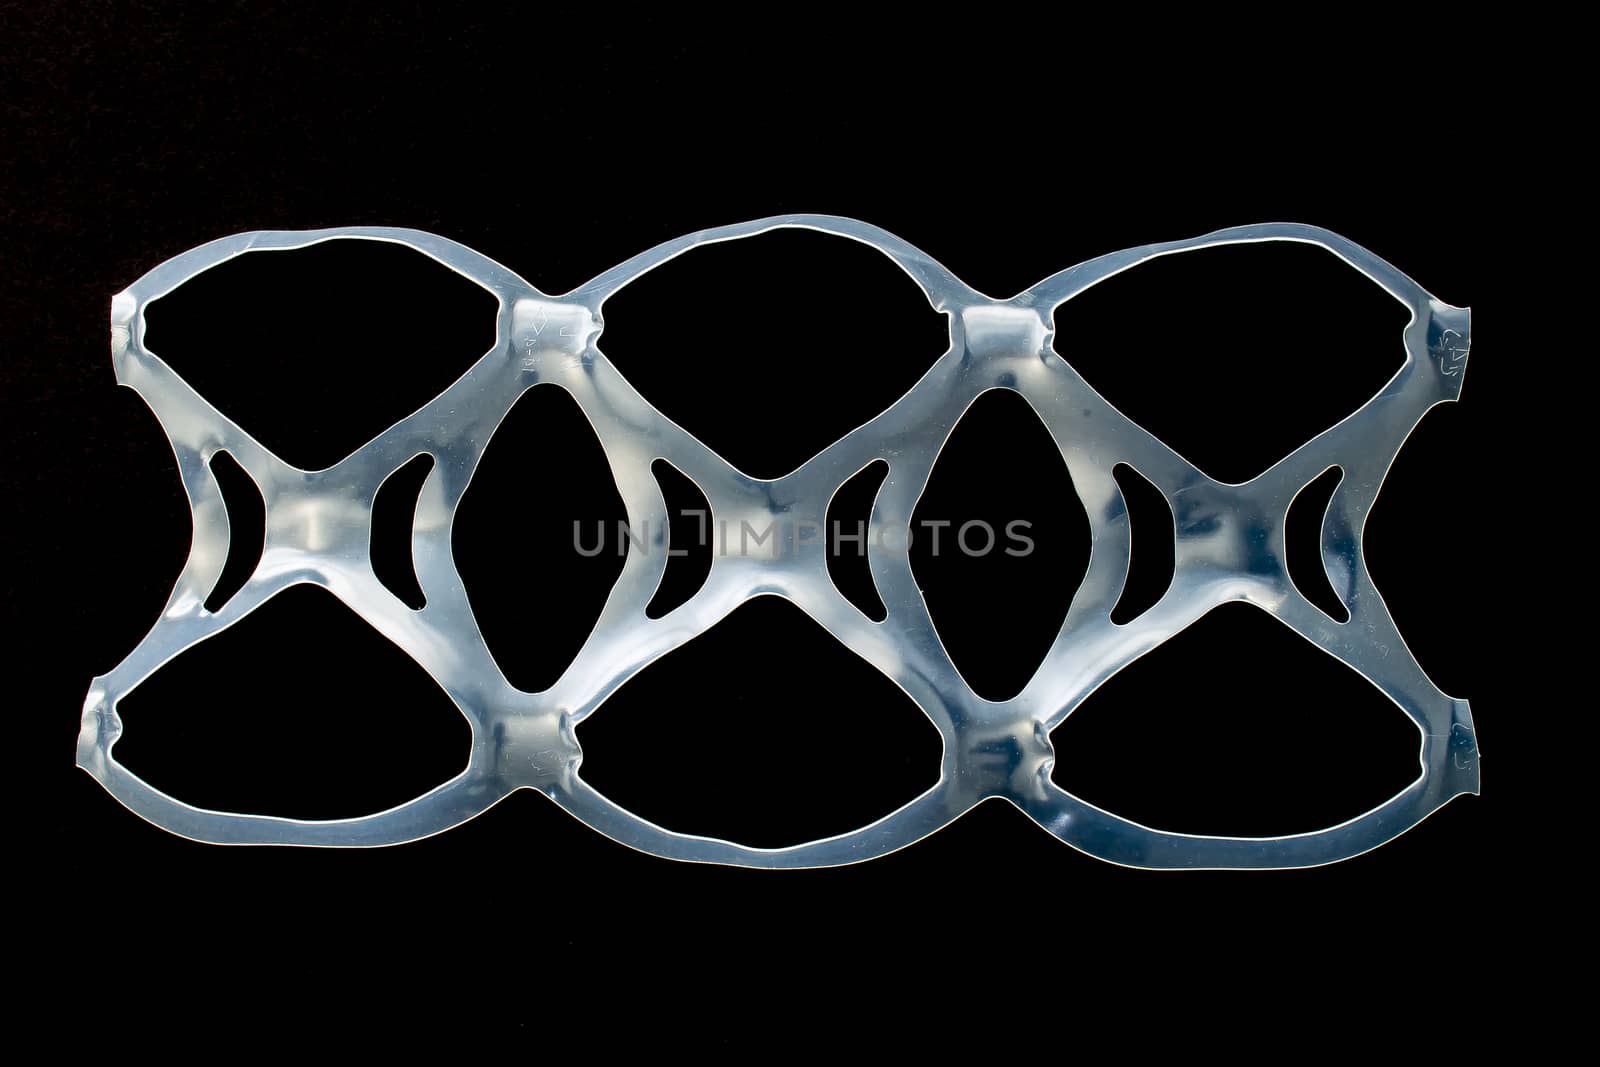 Six pack rings or six pack yokes are a set of connected plastic rings that are used in multi-packs of beverage by oasisamuel